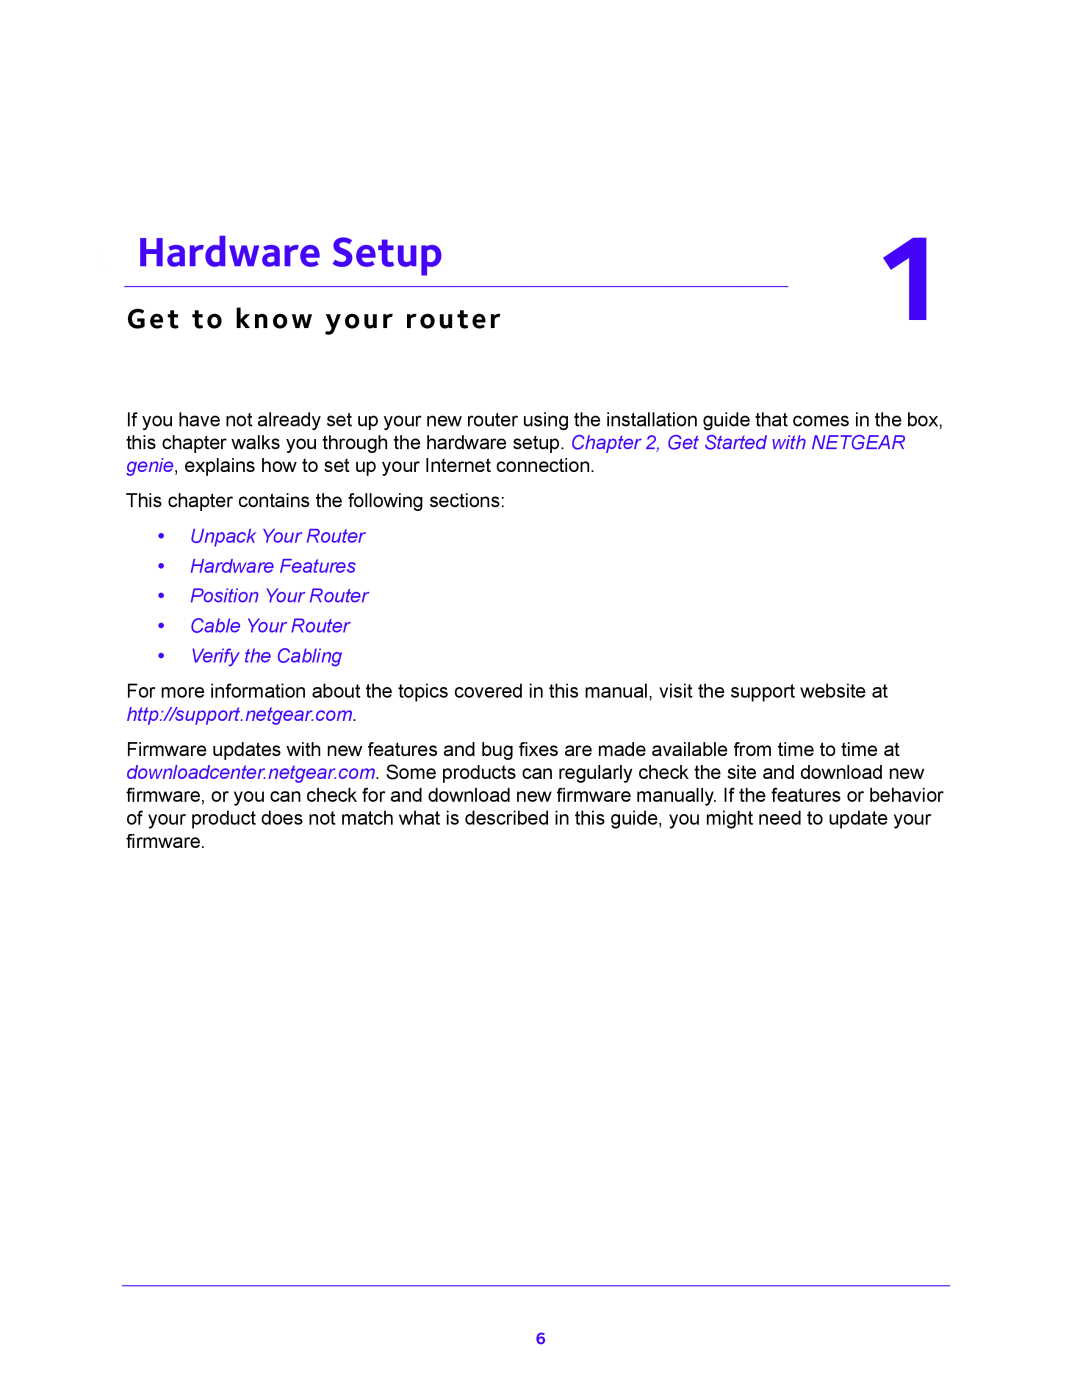 NETGEAR JNR1010V2 Hardware Setup, Get to know your router, Unpack Your Router Hardware Features Position Your Router 